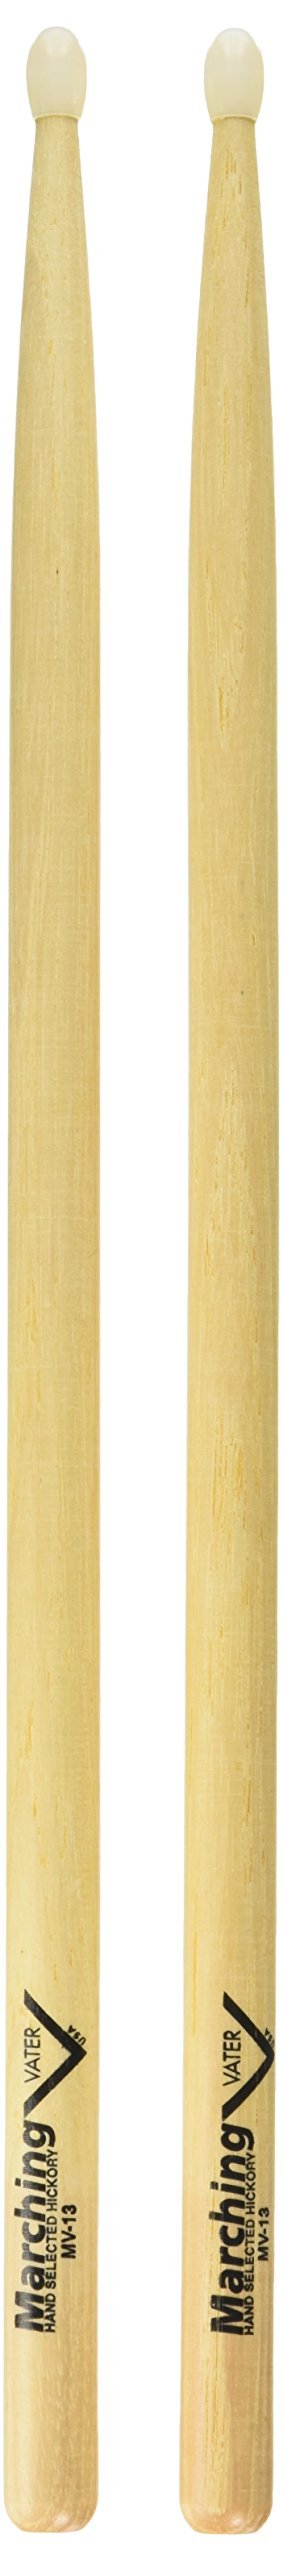 Vater Percussion Marching Sticks Mv13